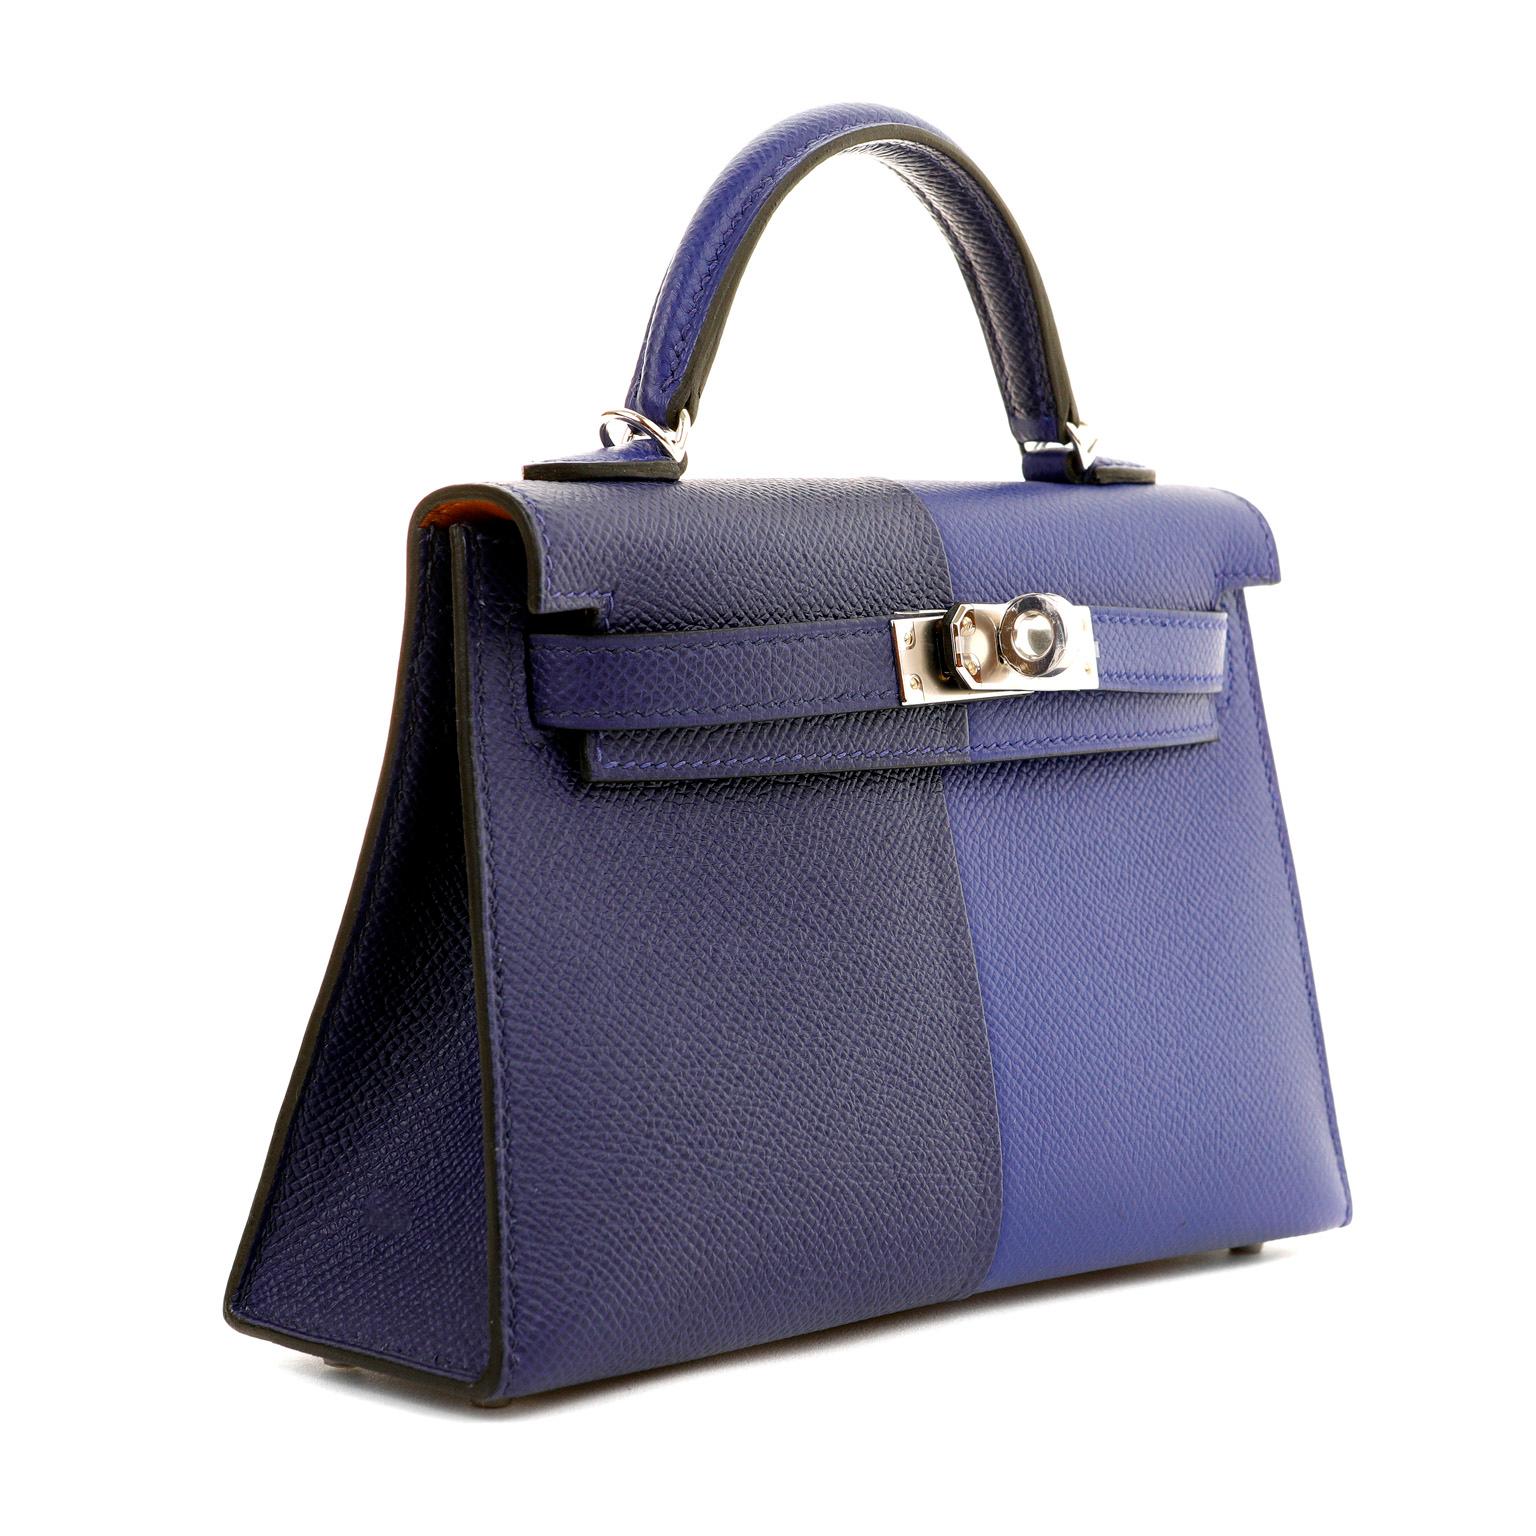 This authentic Hermès 20 cm Special Edition Blue Bi Color Epsom Mini Kelly is pristine with the protective plastic intact on the hardware.  Petite and feminine, the crossbody Kelly is very collectible in the 20 cm silhouette.  Blue Electric and Blue